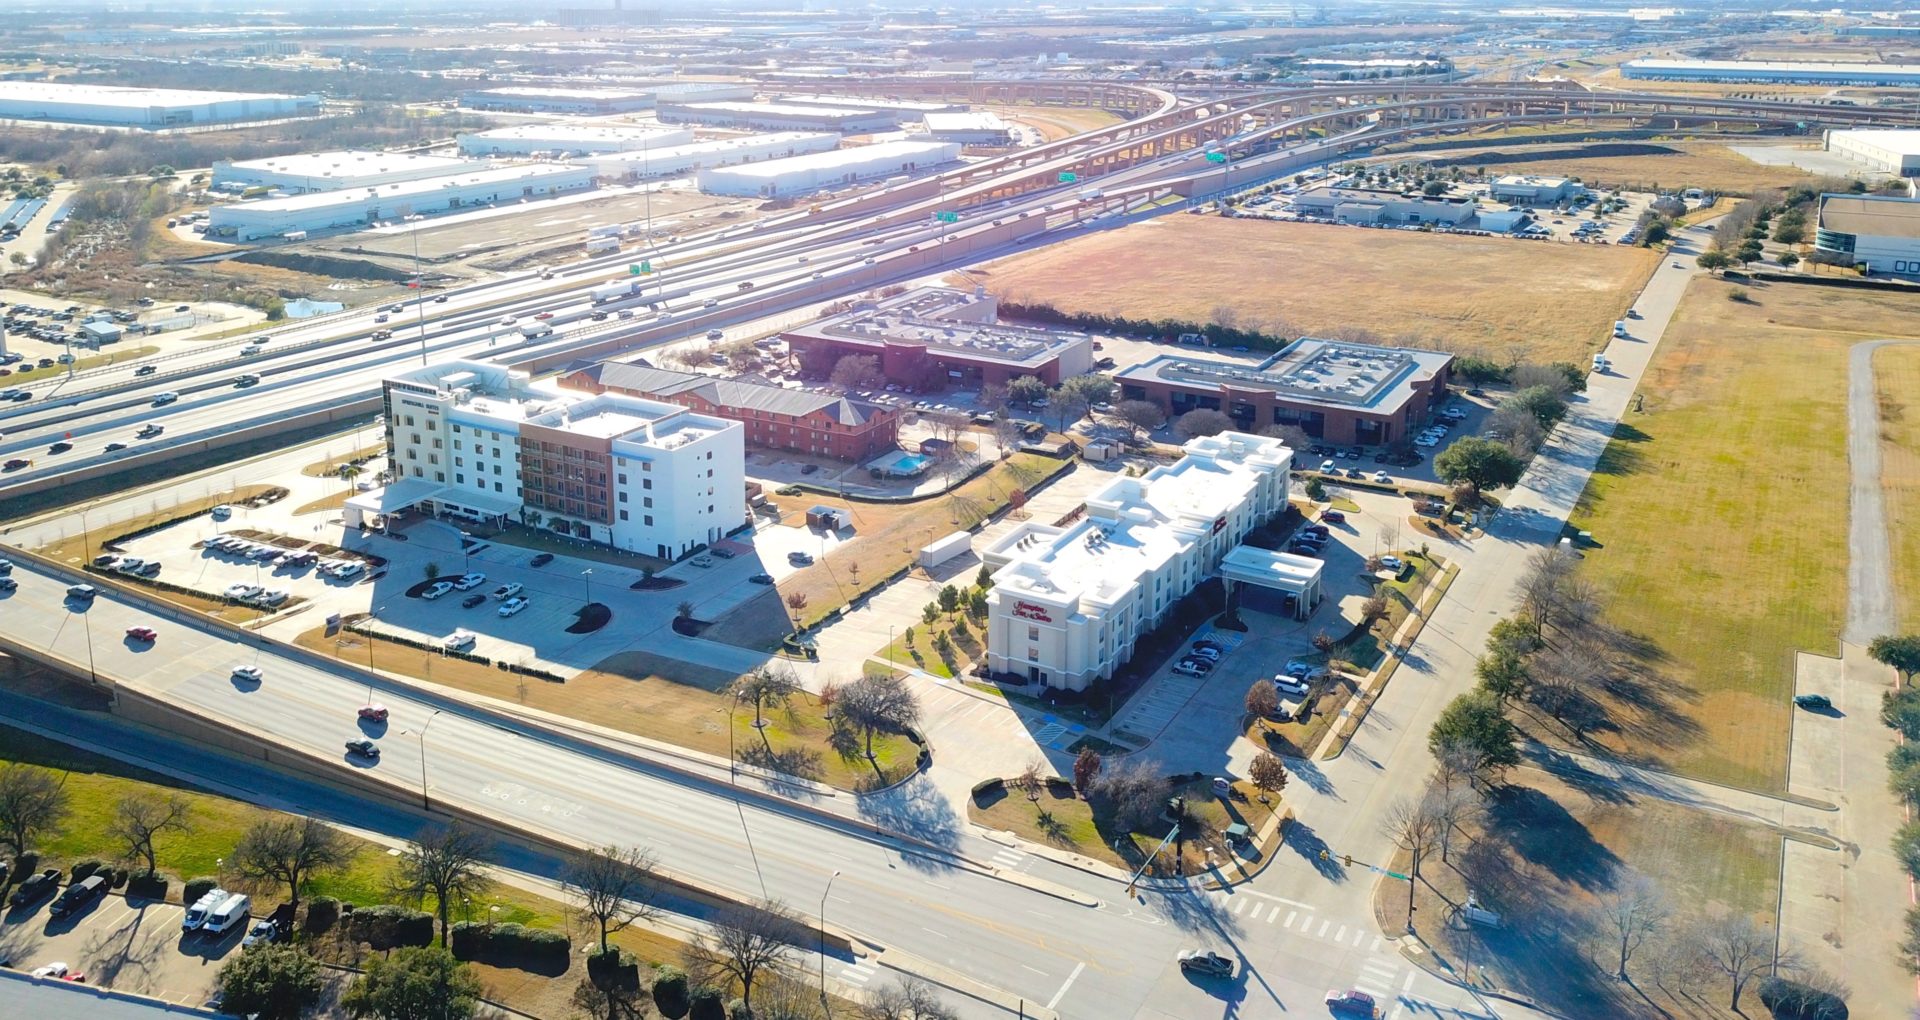 Aerial view of the two Fossil Creek Place buildings with the surrounding parking lots and hotels and adjacent highways